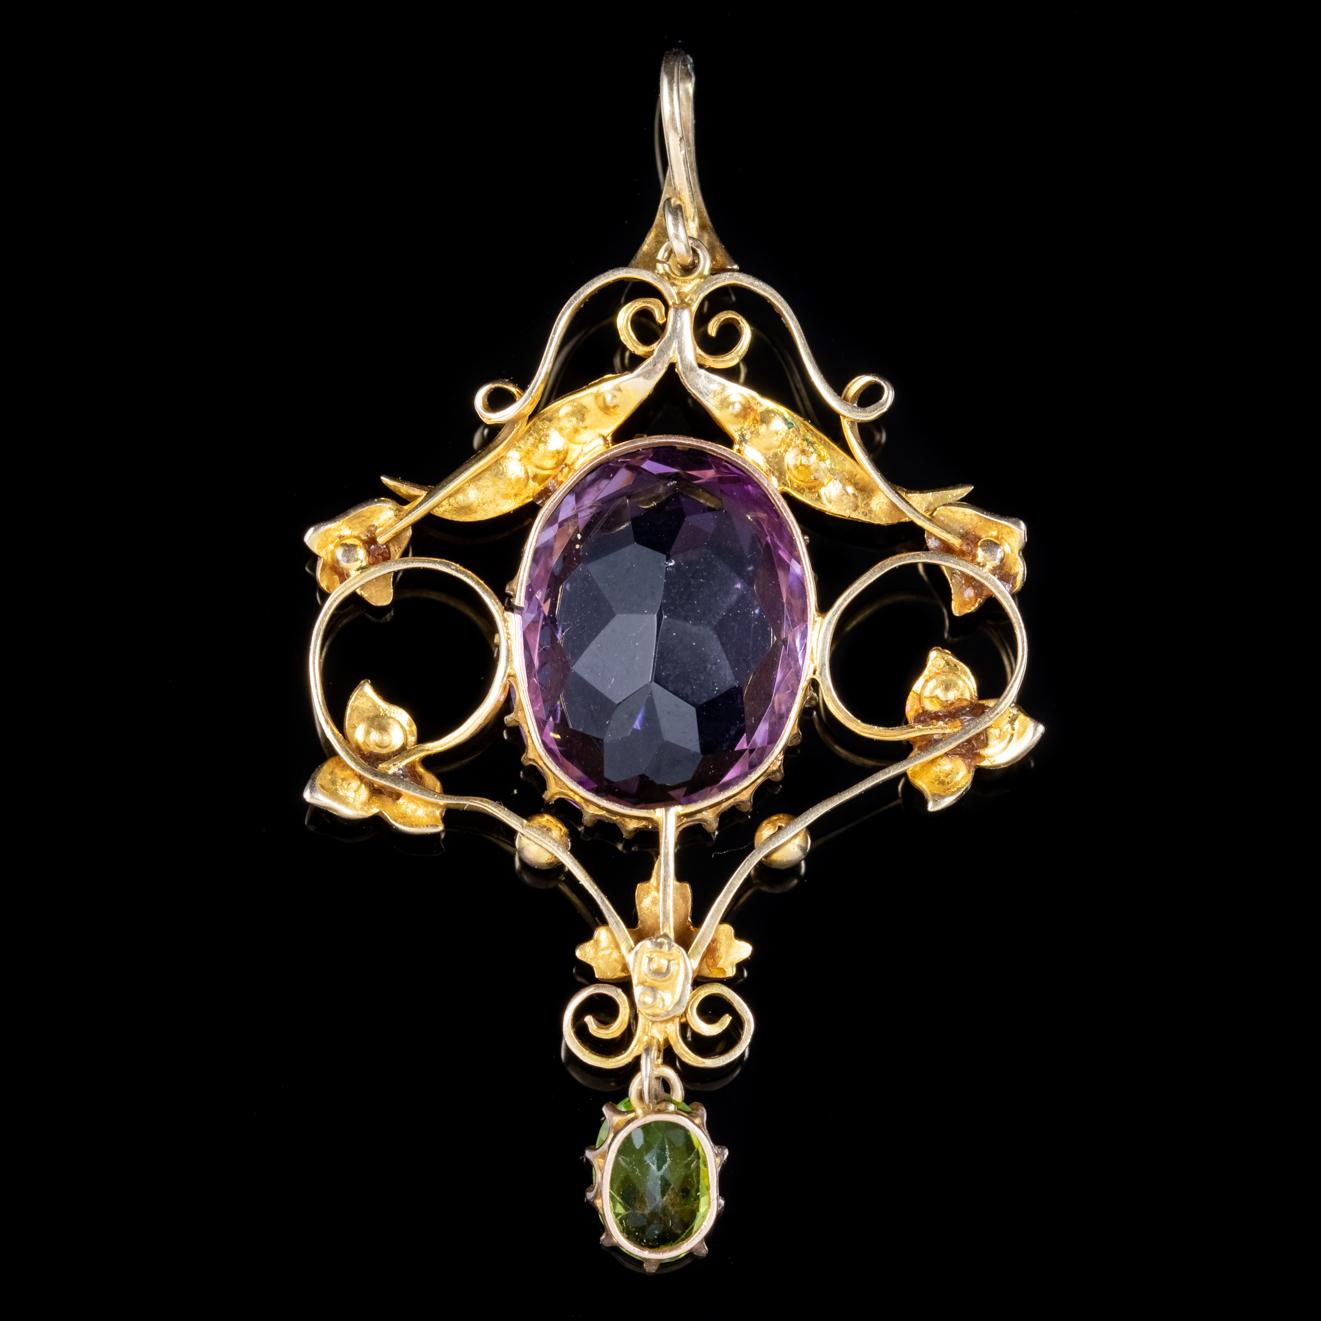 A splendid antique Suffragette pendant from the Edwardian era decorated with Pearls and a lovely Peridot dropper with an impressive 8ct Amethyst in the centre. Suffragette jewellery was worn to show one’s allegiance to the women’s Suffragette